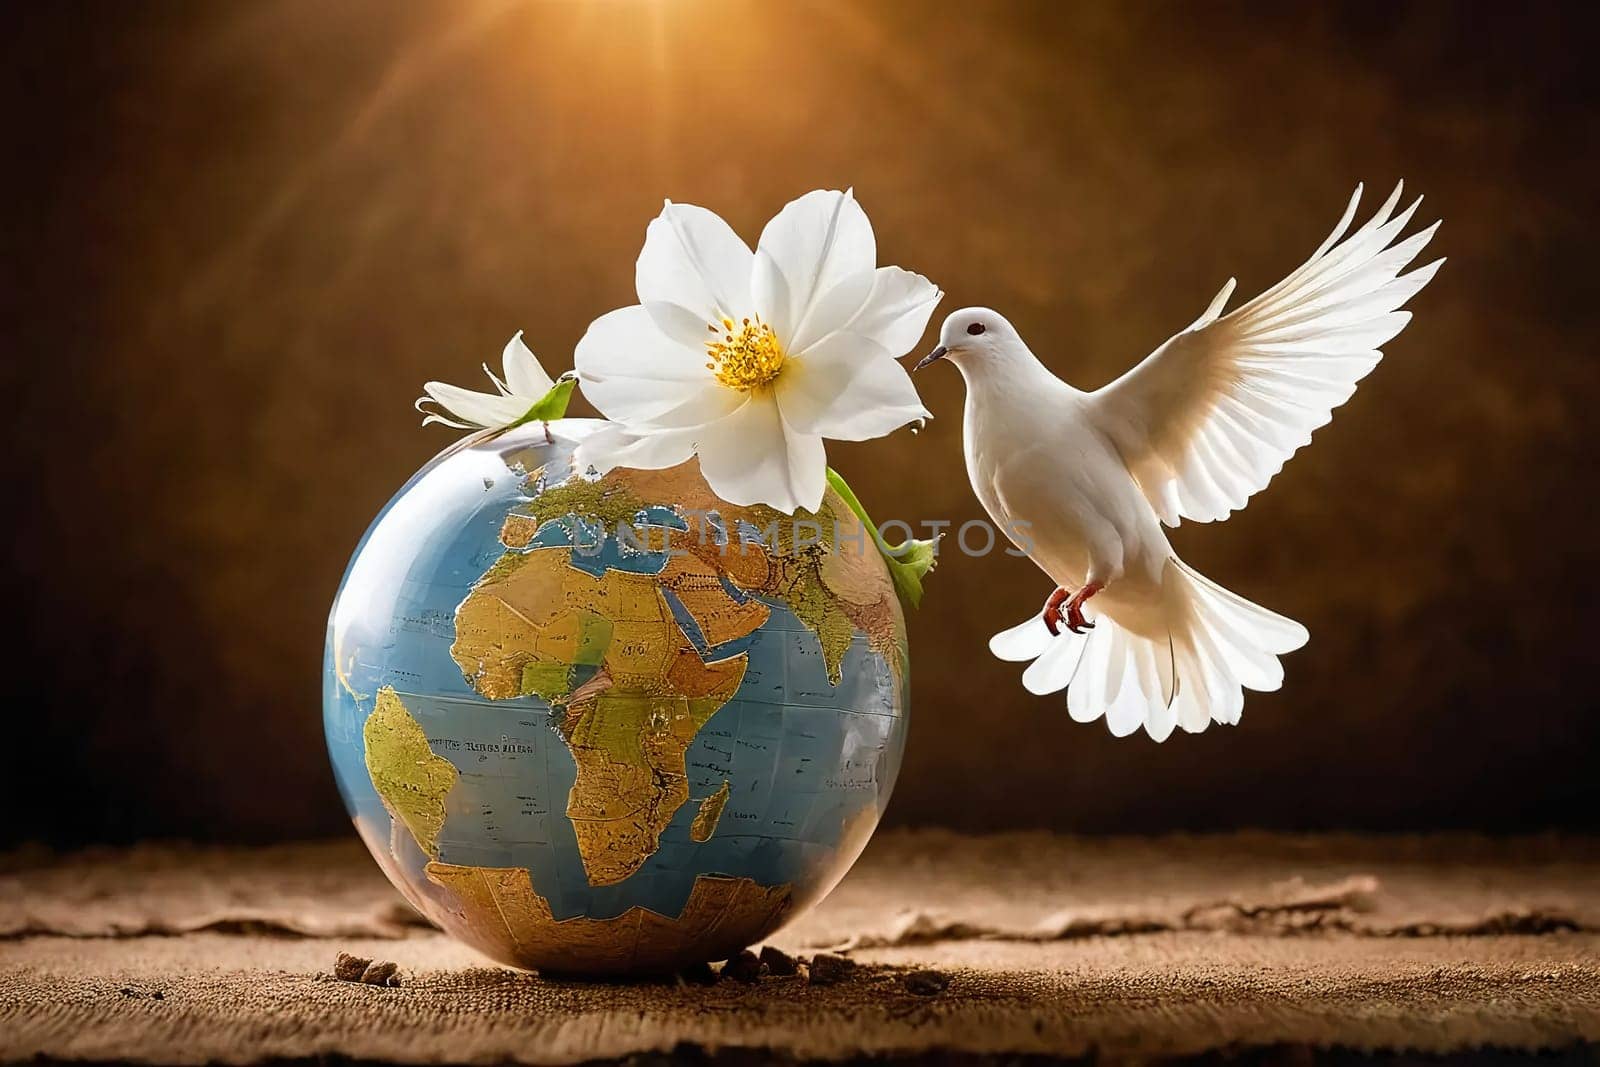 The dove of peace flies over the globe by VeronikaAngo